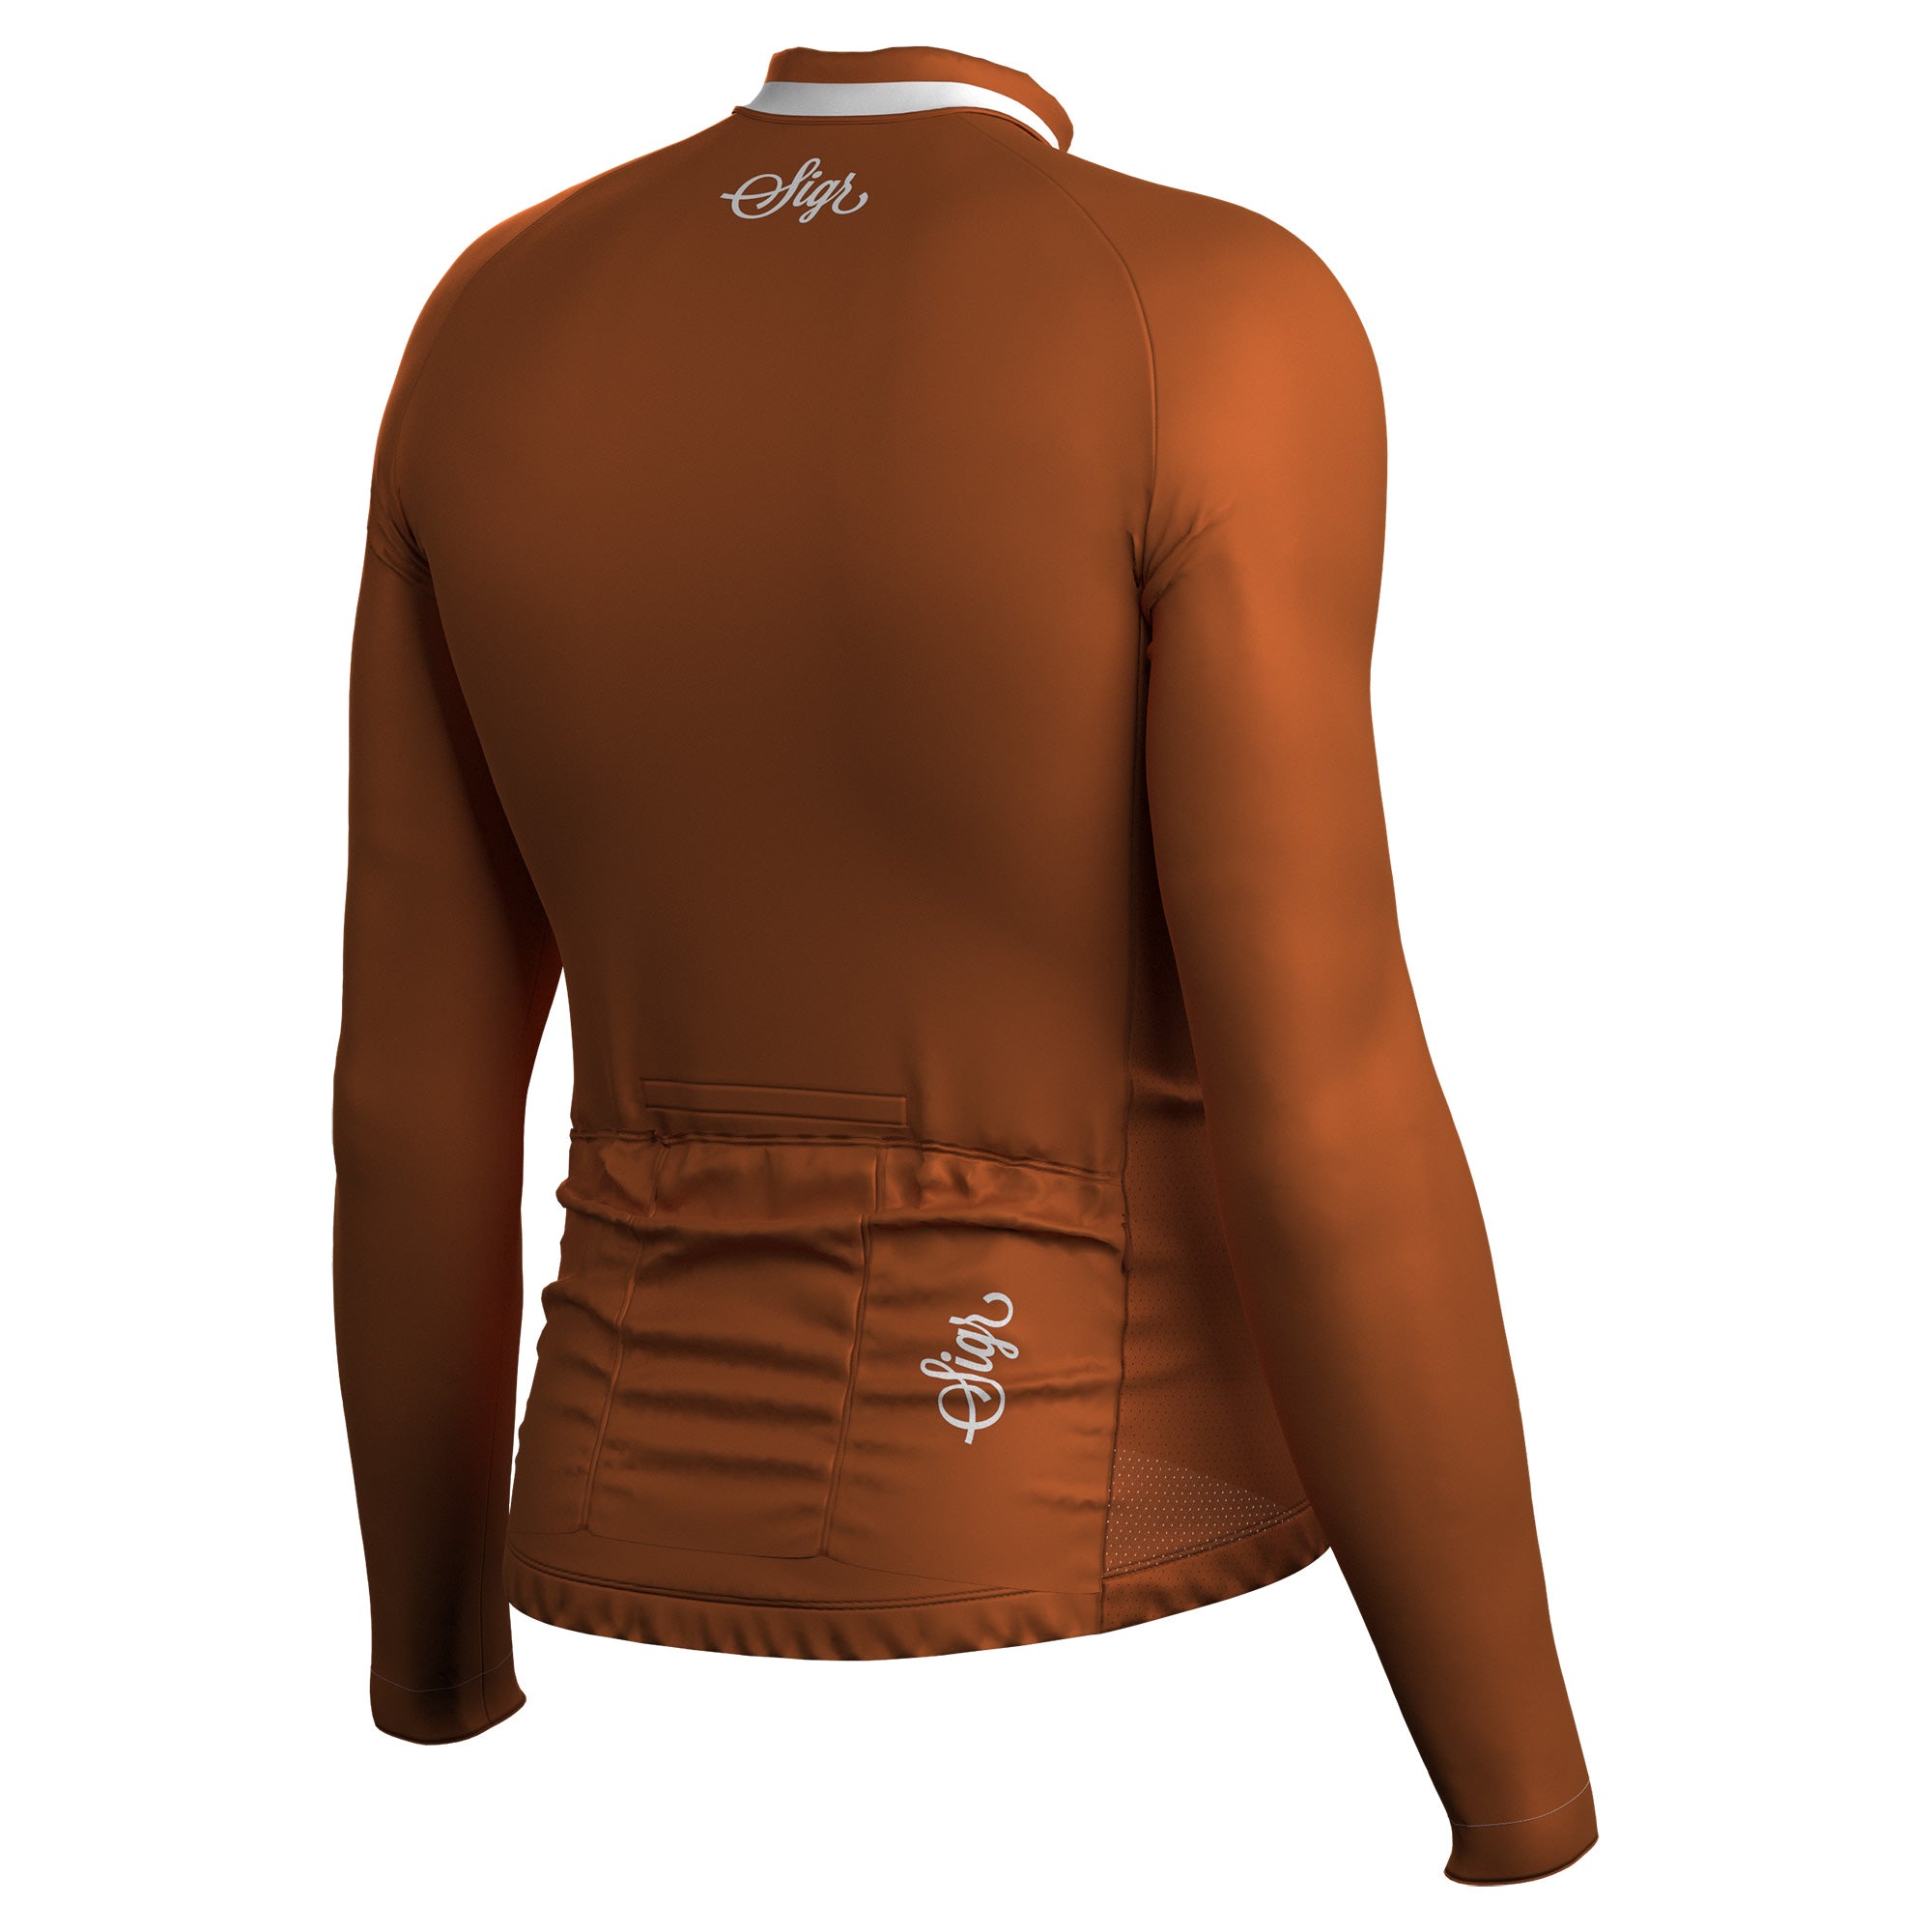 Wildflower - Brown Long Sleeved Jersey for Men